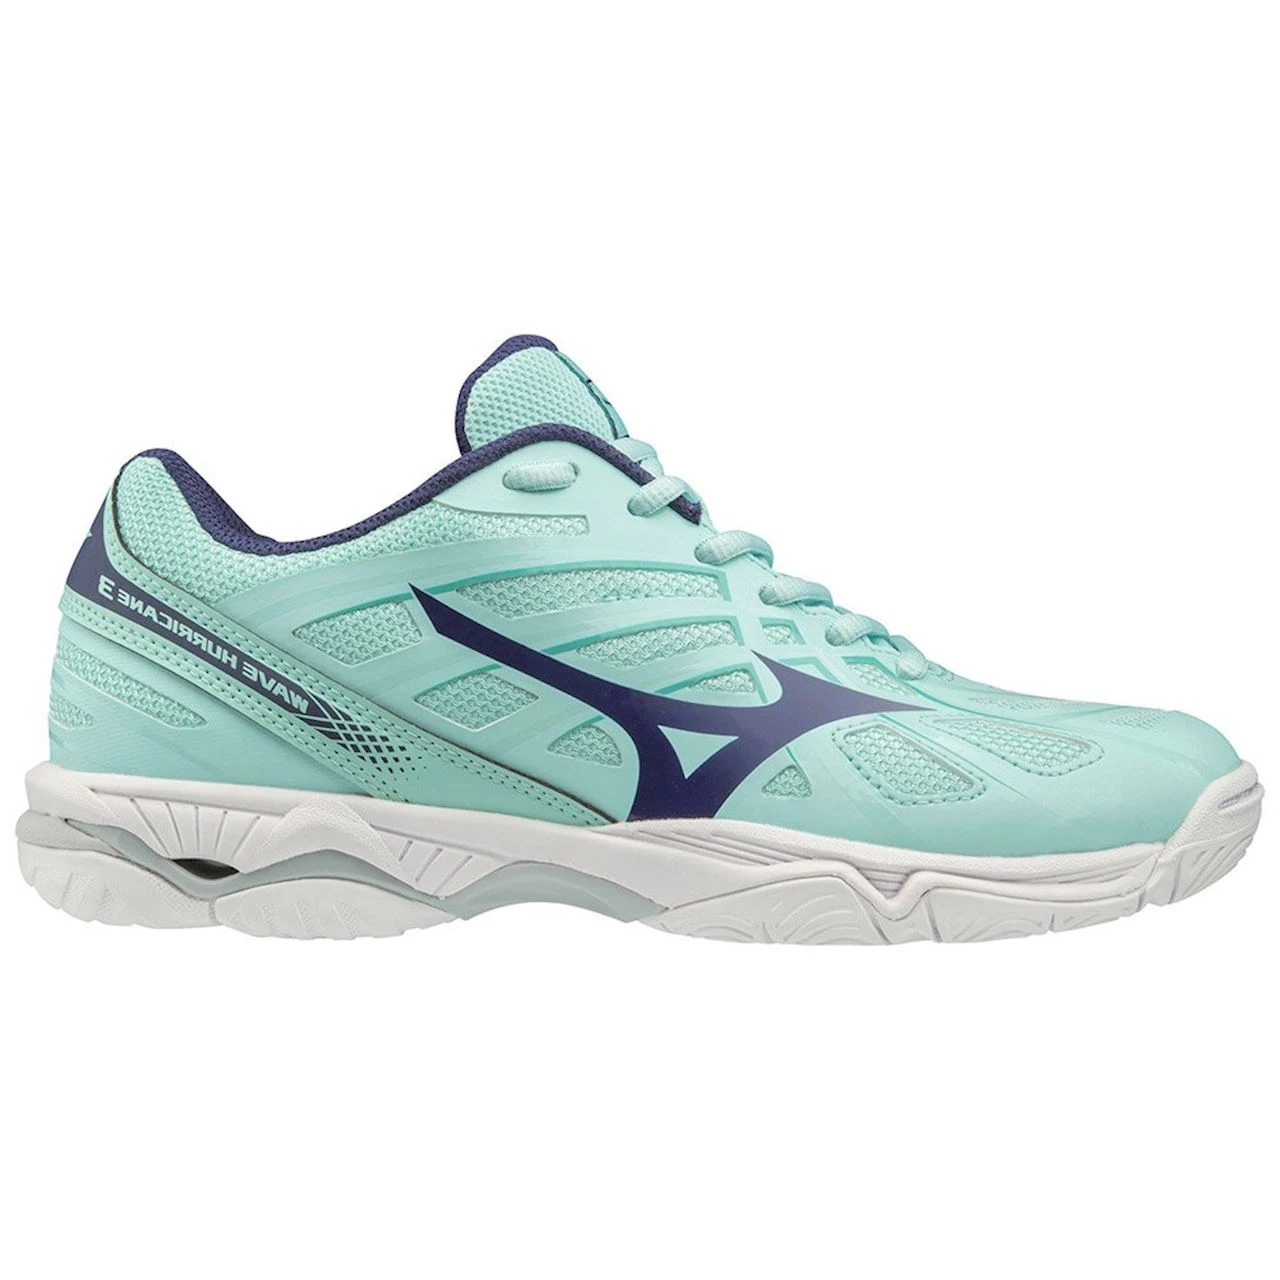 Sneakers volleyball for women Mizuno Wave hurricane 3 (W)  turquoise|Upstream Shoes| - AliExpress